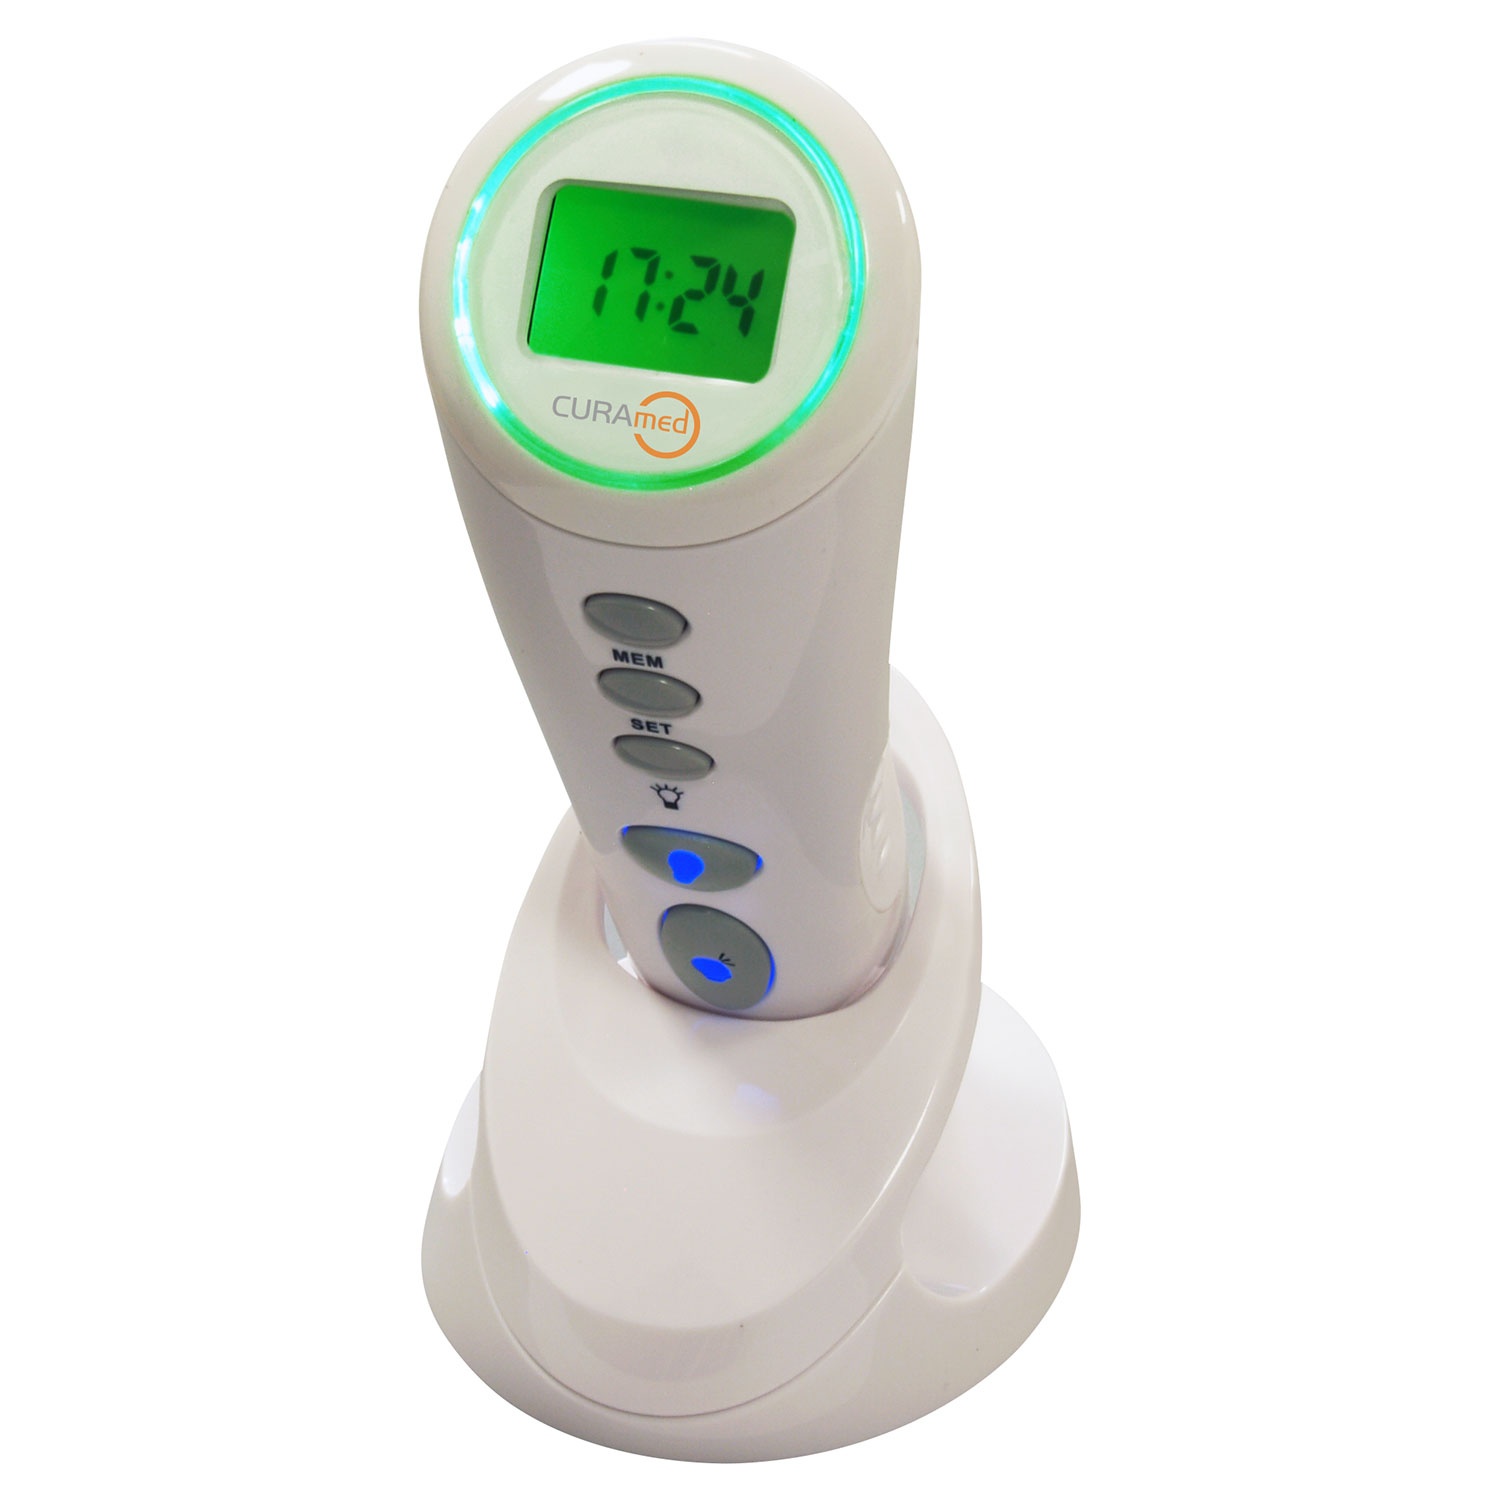 CURAMED Thermometer